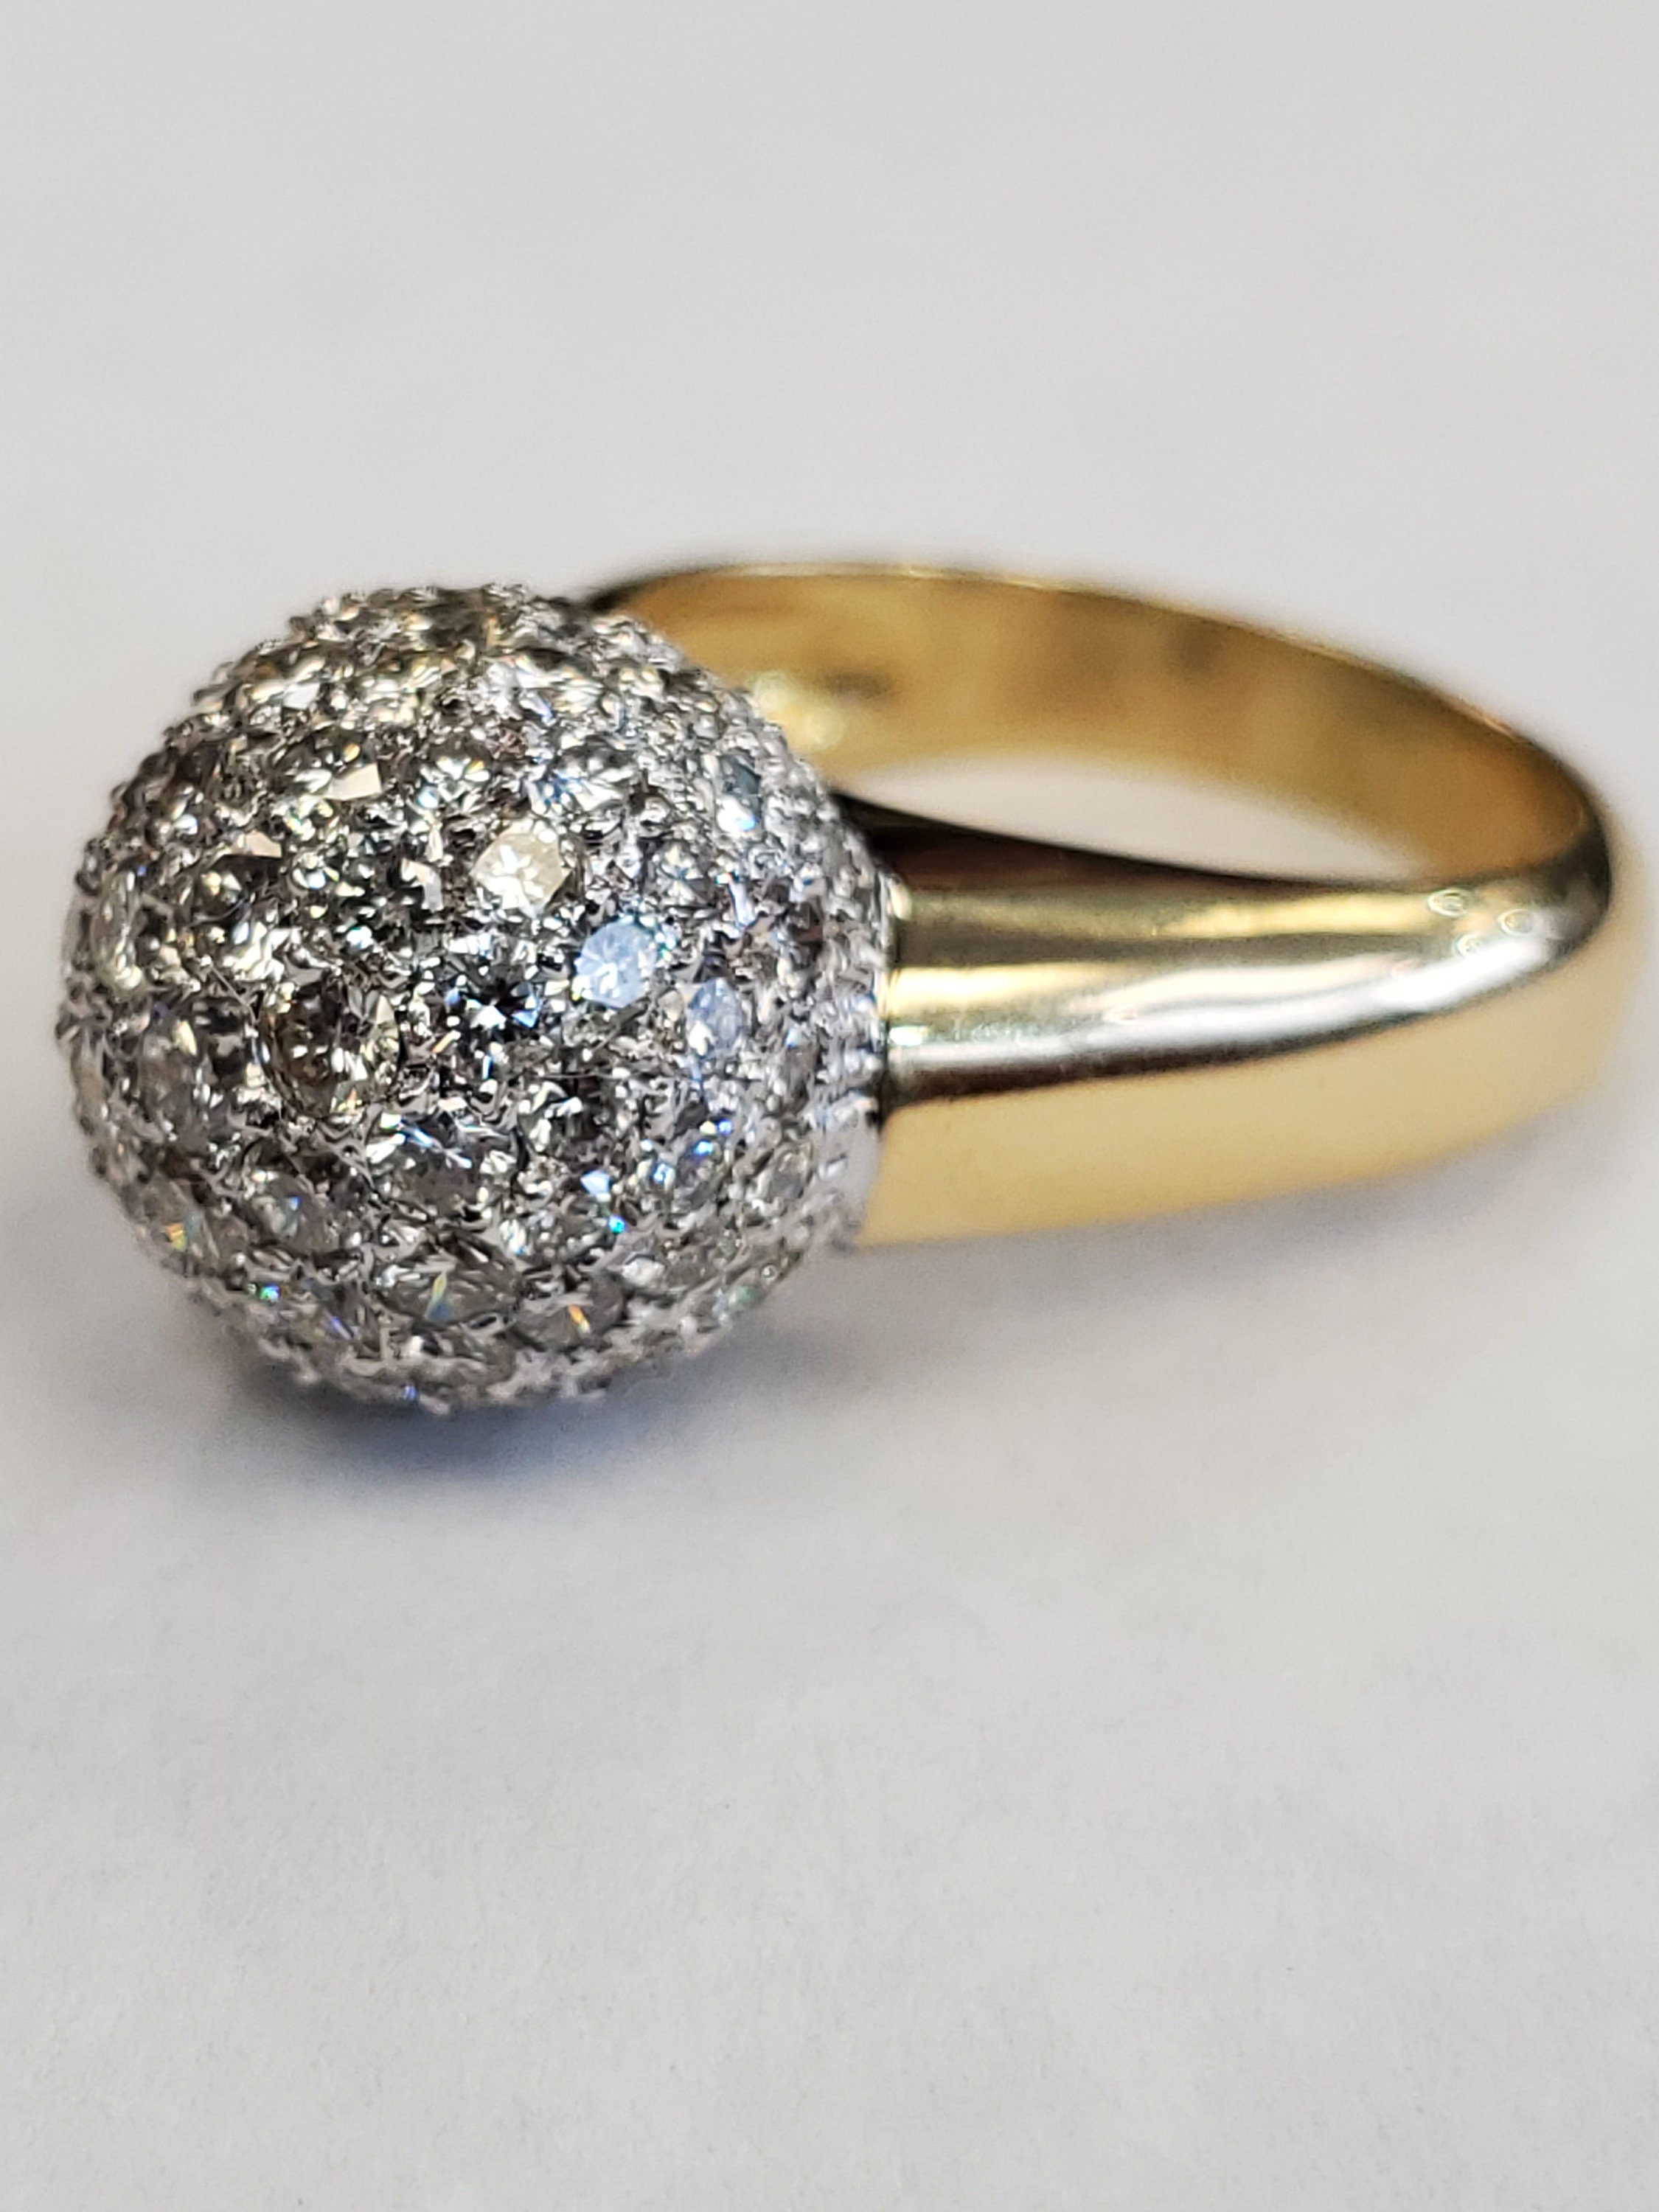 Product Image for Diamond Moon Ring 3.5cttw Pave in 18k yellow gold size 8